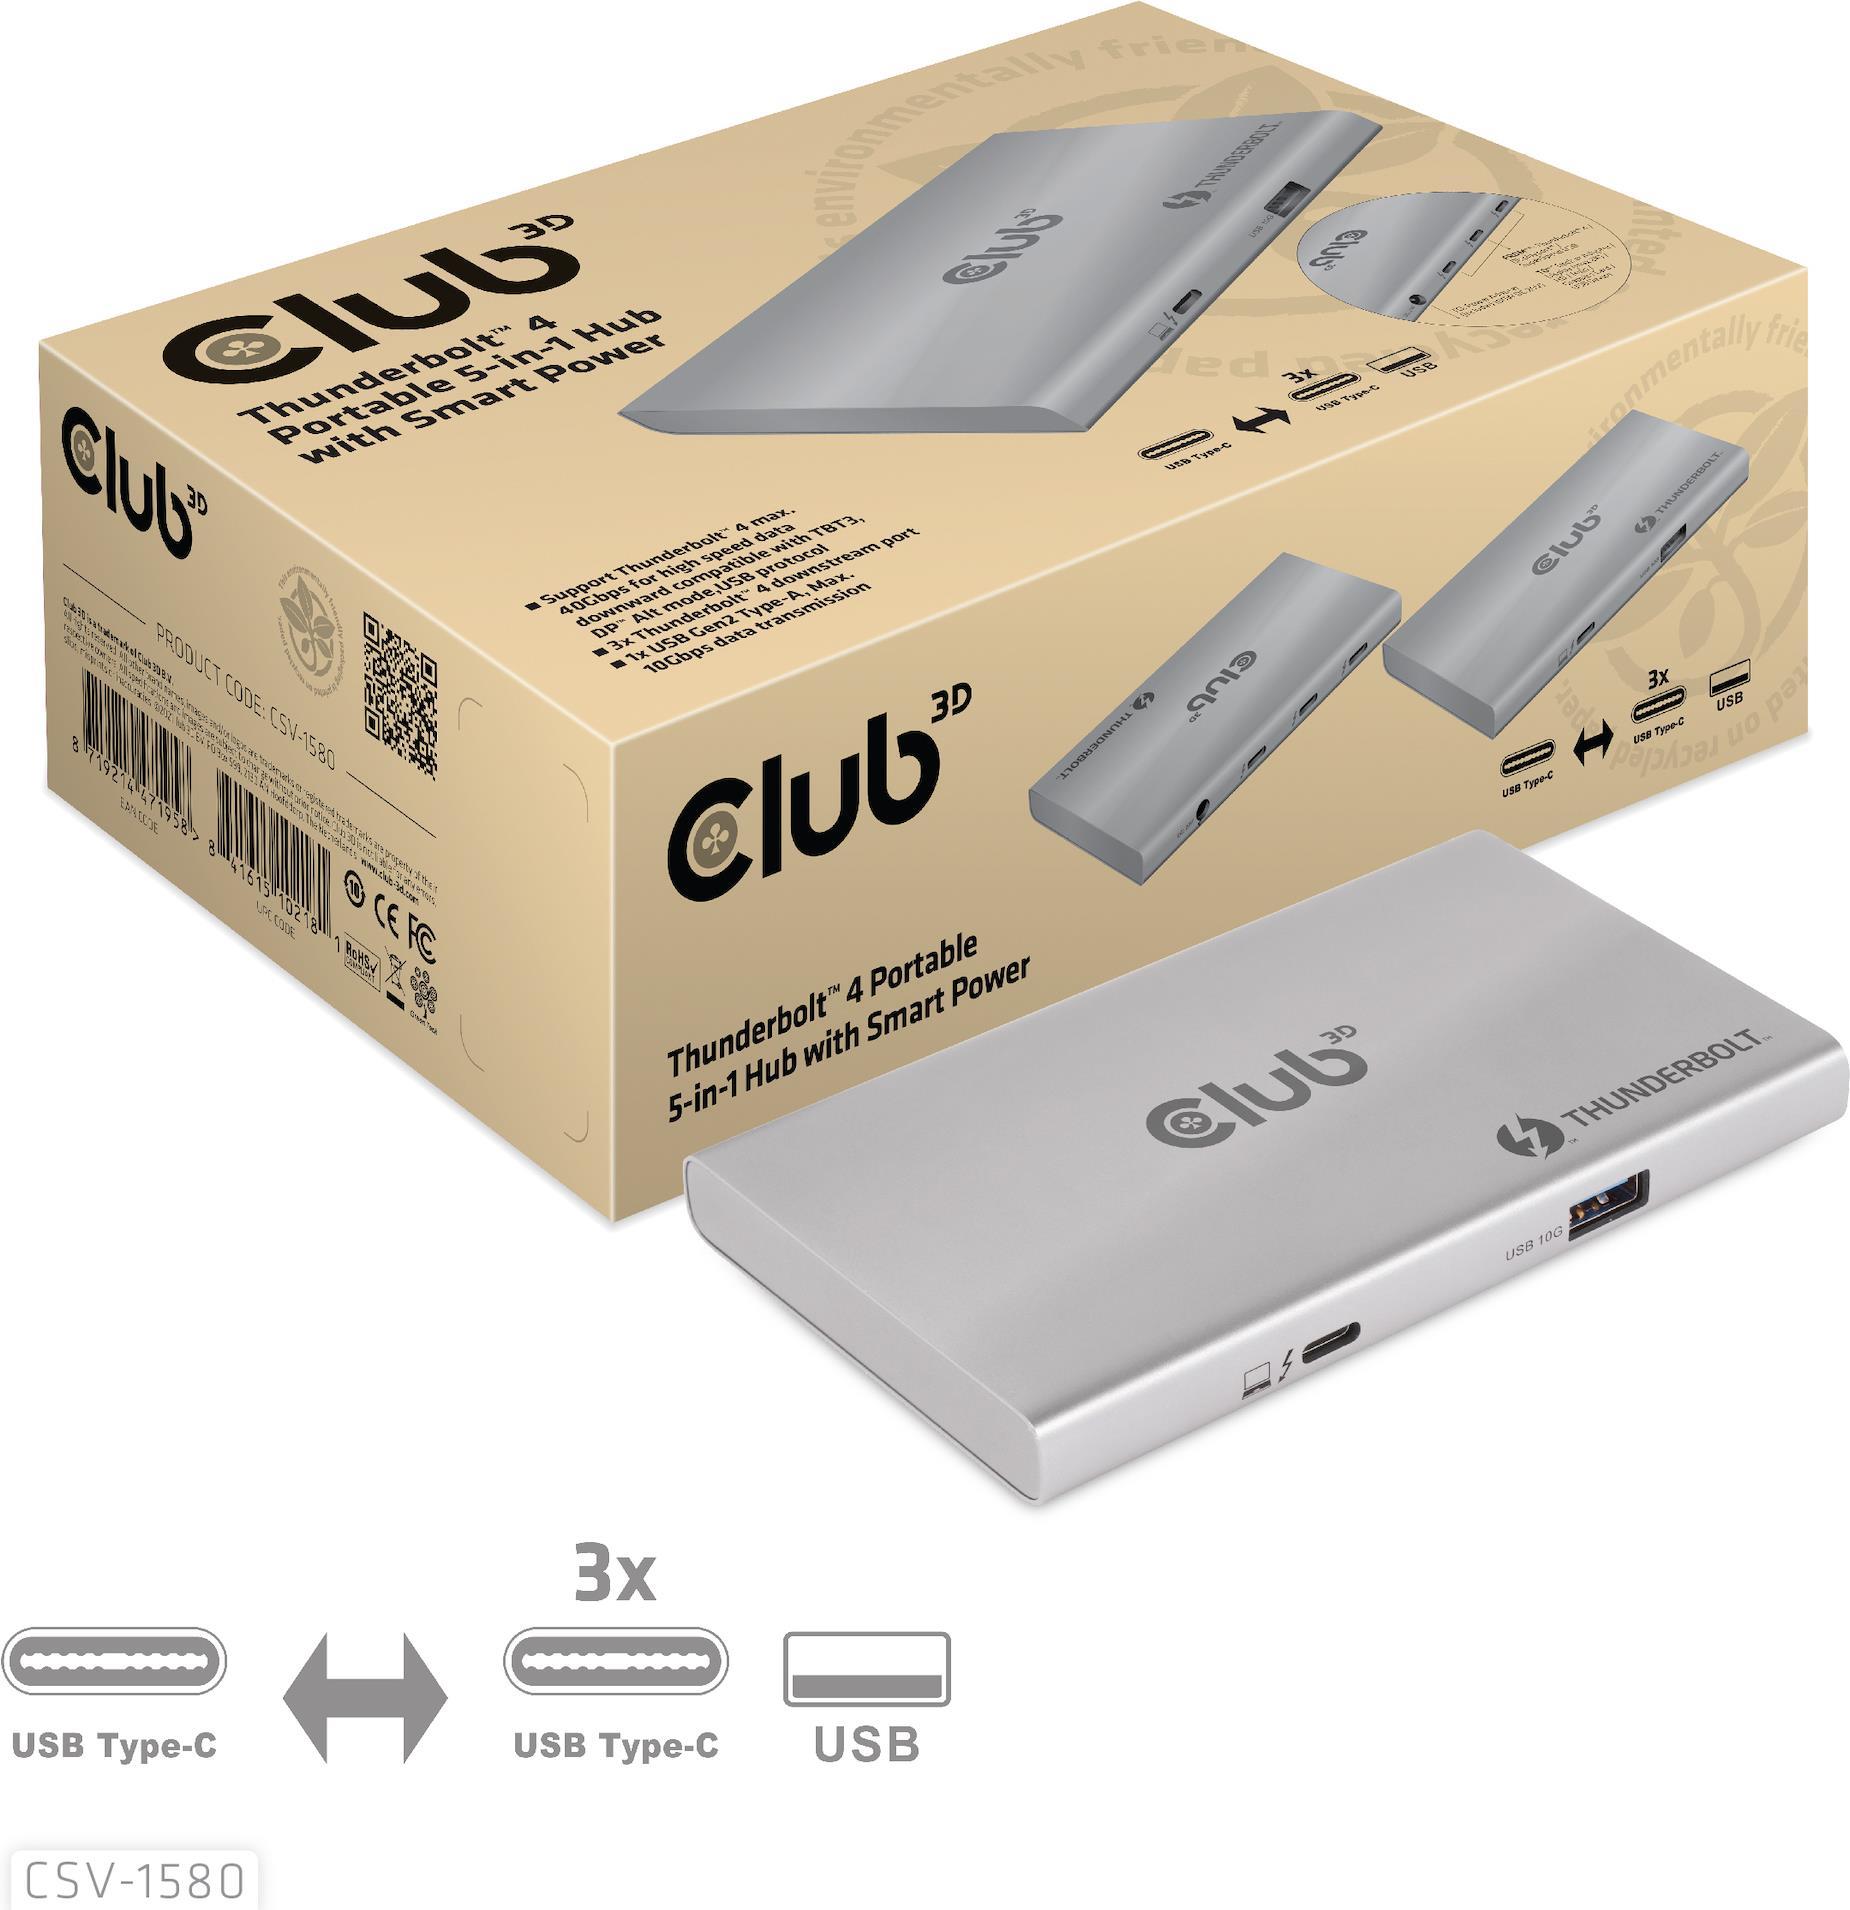 Club3D Thunderbolt 4 Portable 5-in-1 Hub with Smart Power (CSV-1580)